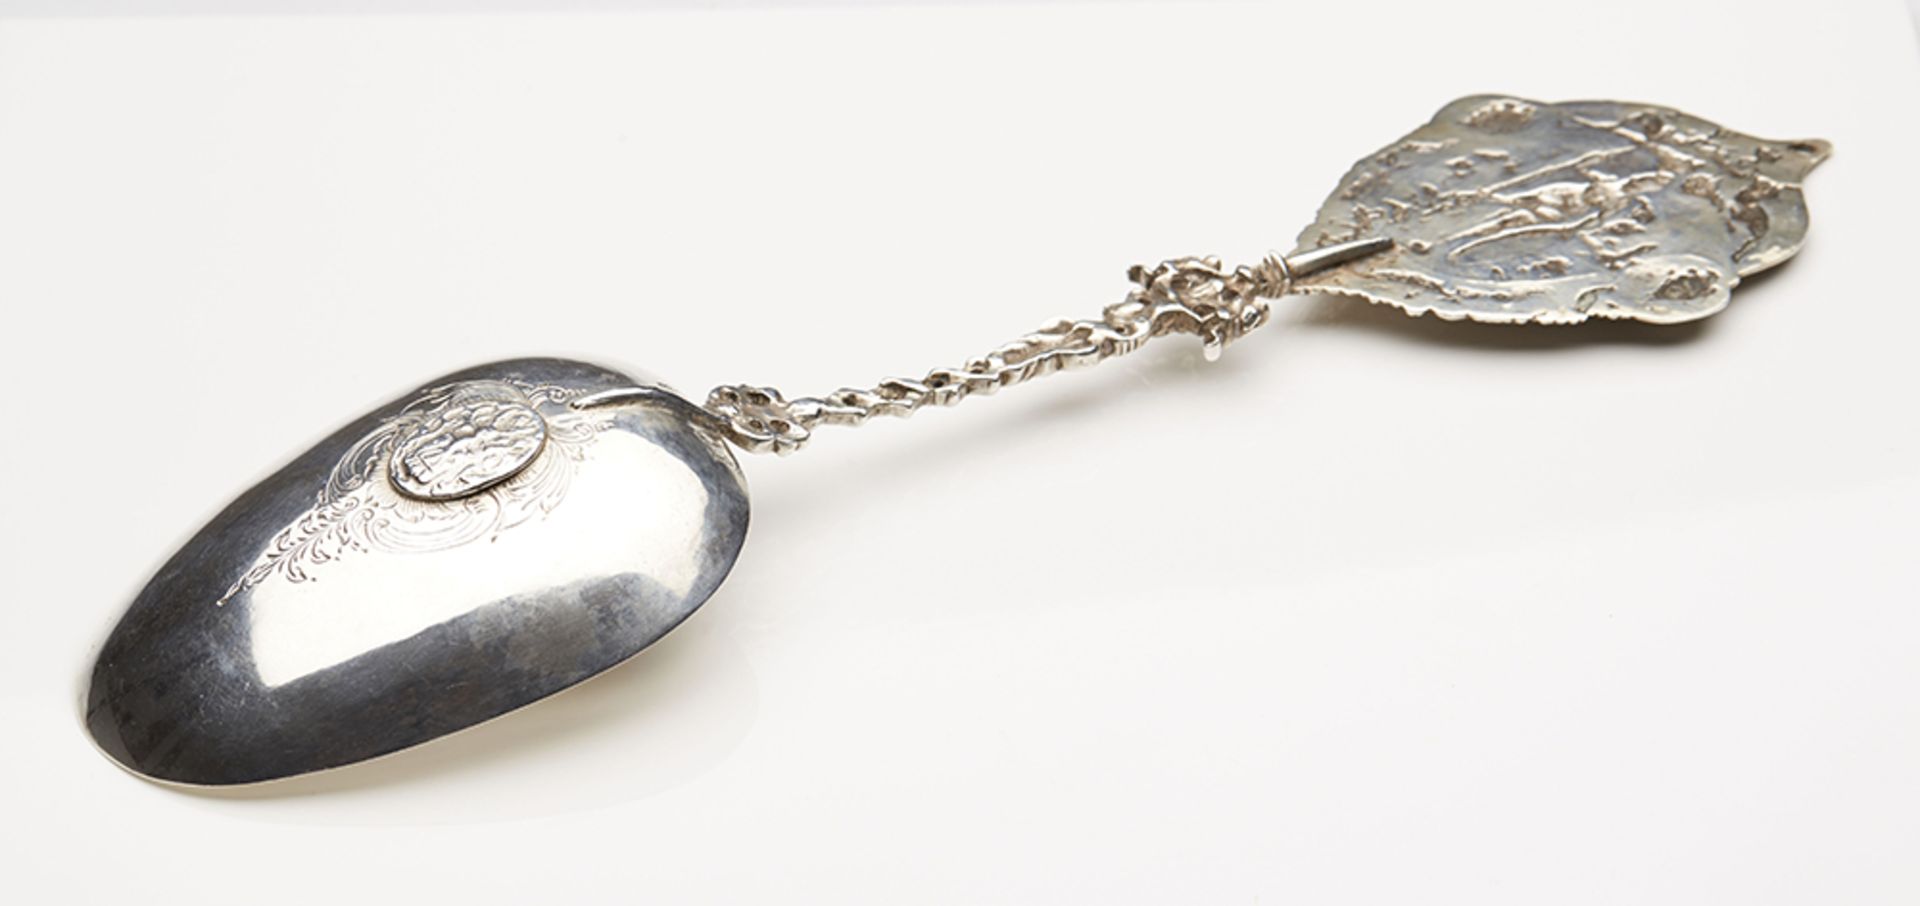 Fine Antique Continental Silver Presentation Spoon With Classical Terminal 18/19Th C. - Image 4 of 8